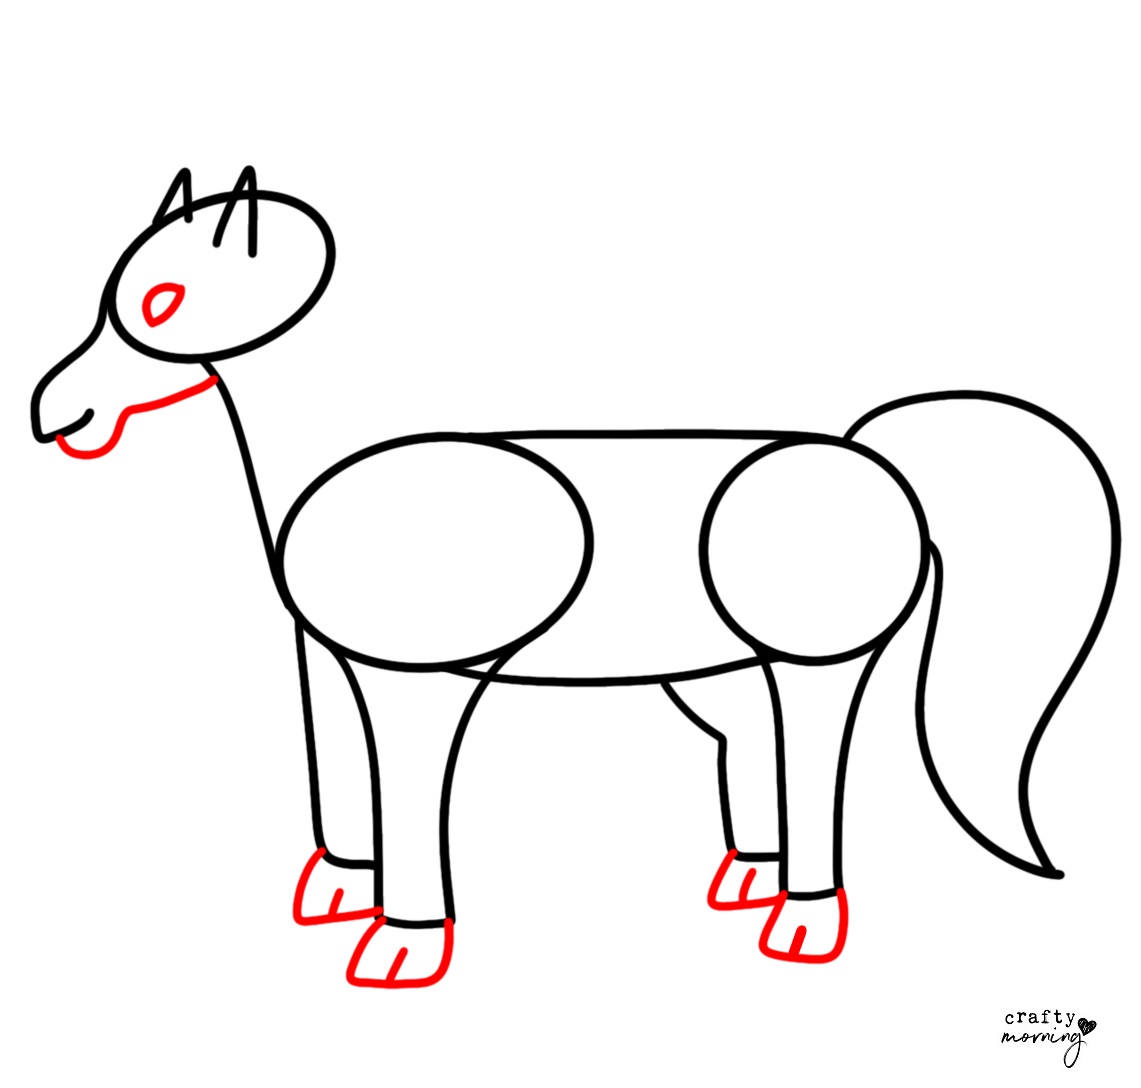 How to Draw a Horse (Easy Step by Step) - Crafty Morning